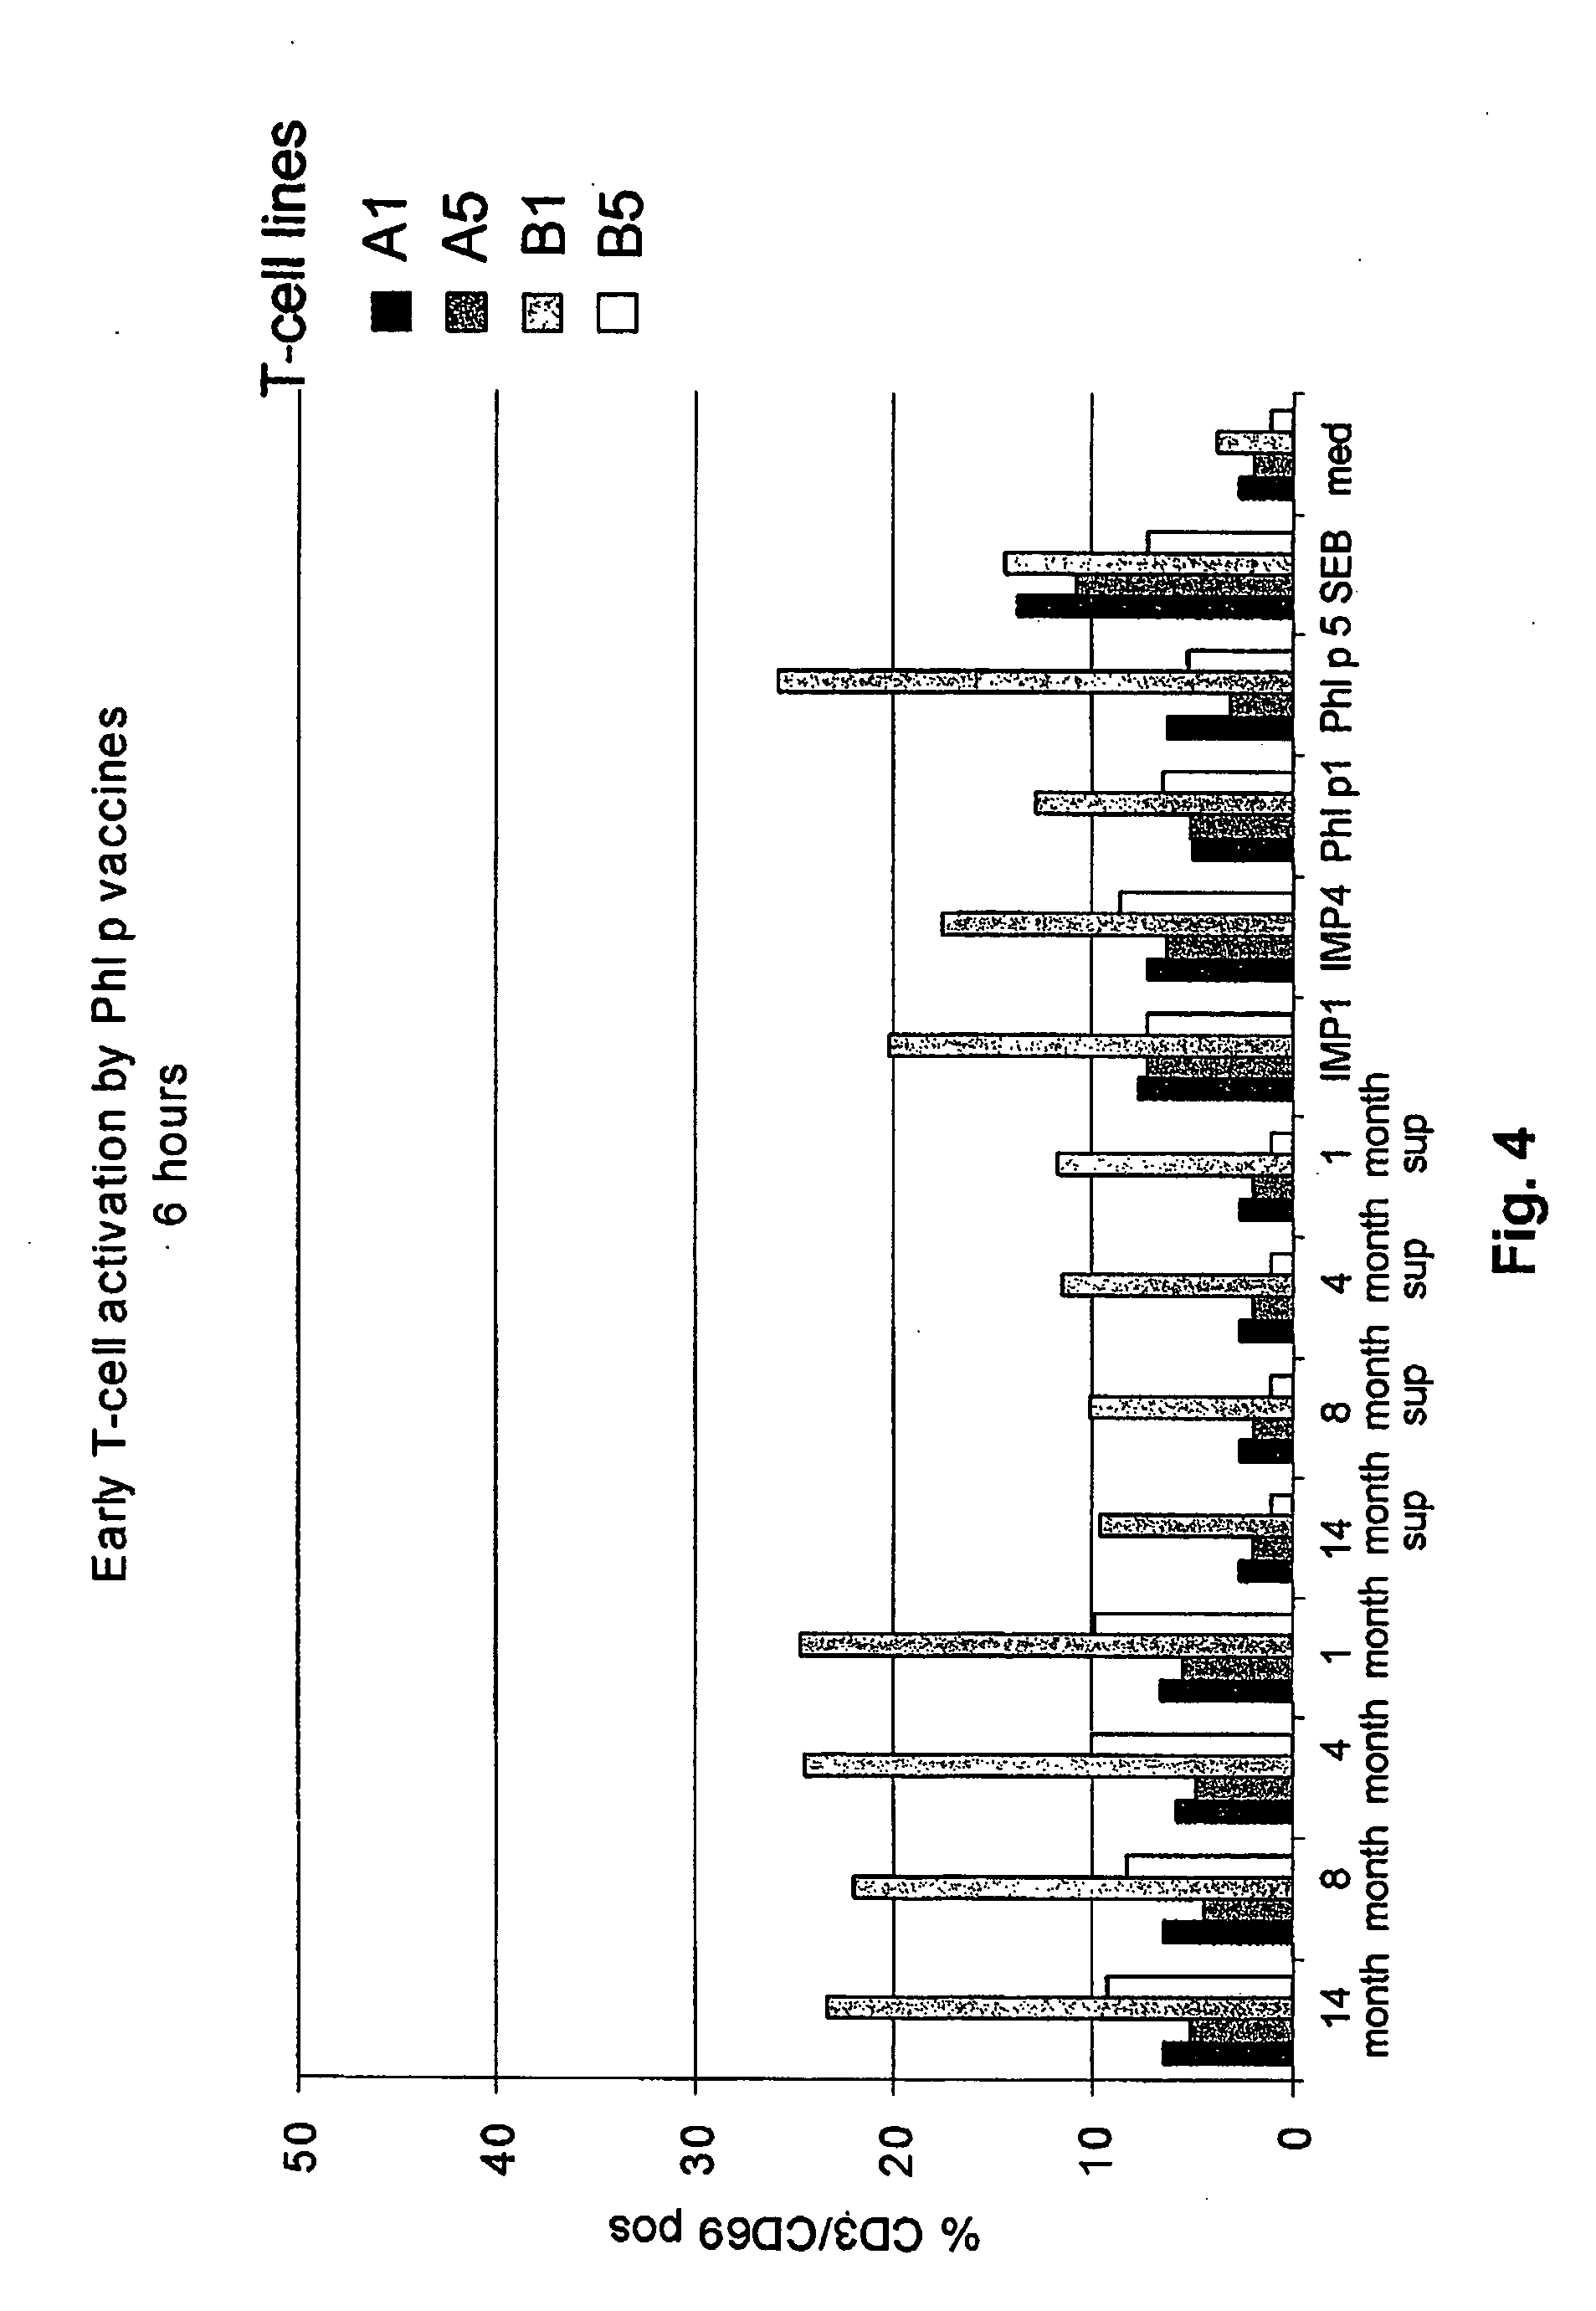 Method of evaluating the immunological activity of a vaccine